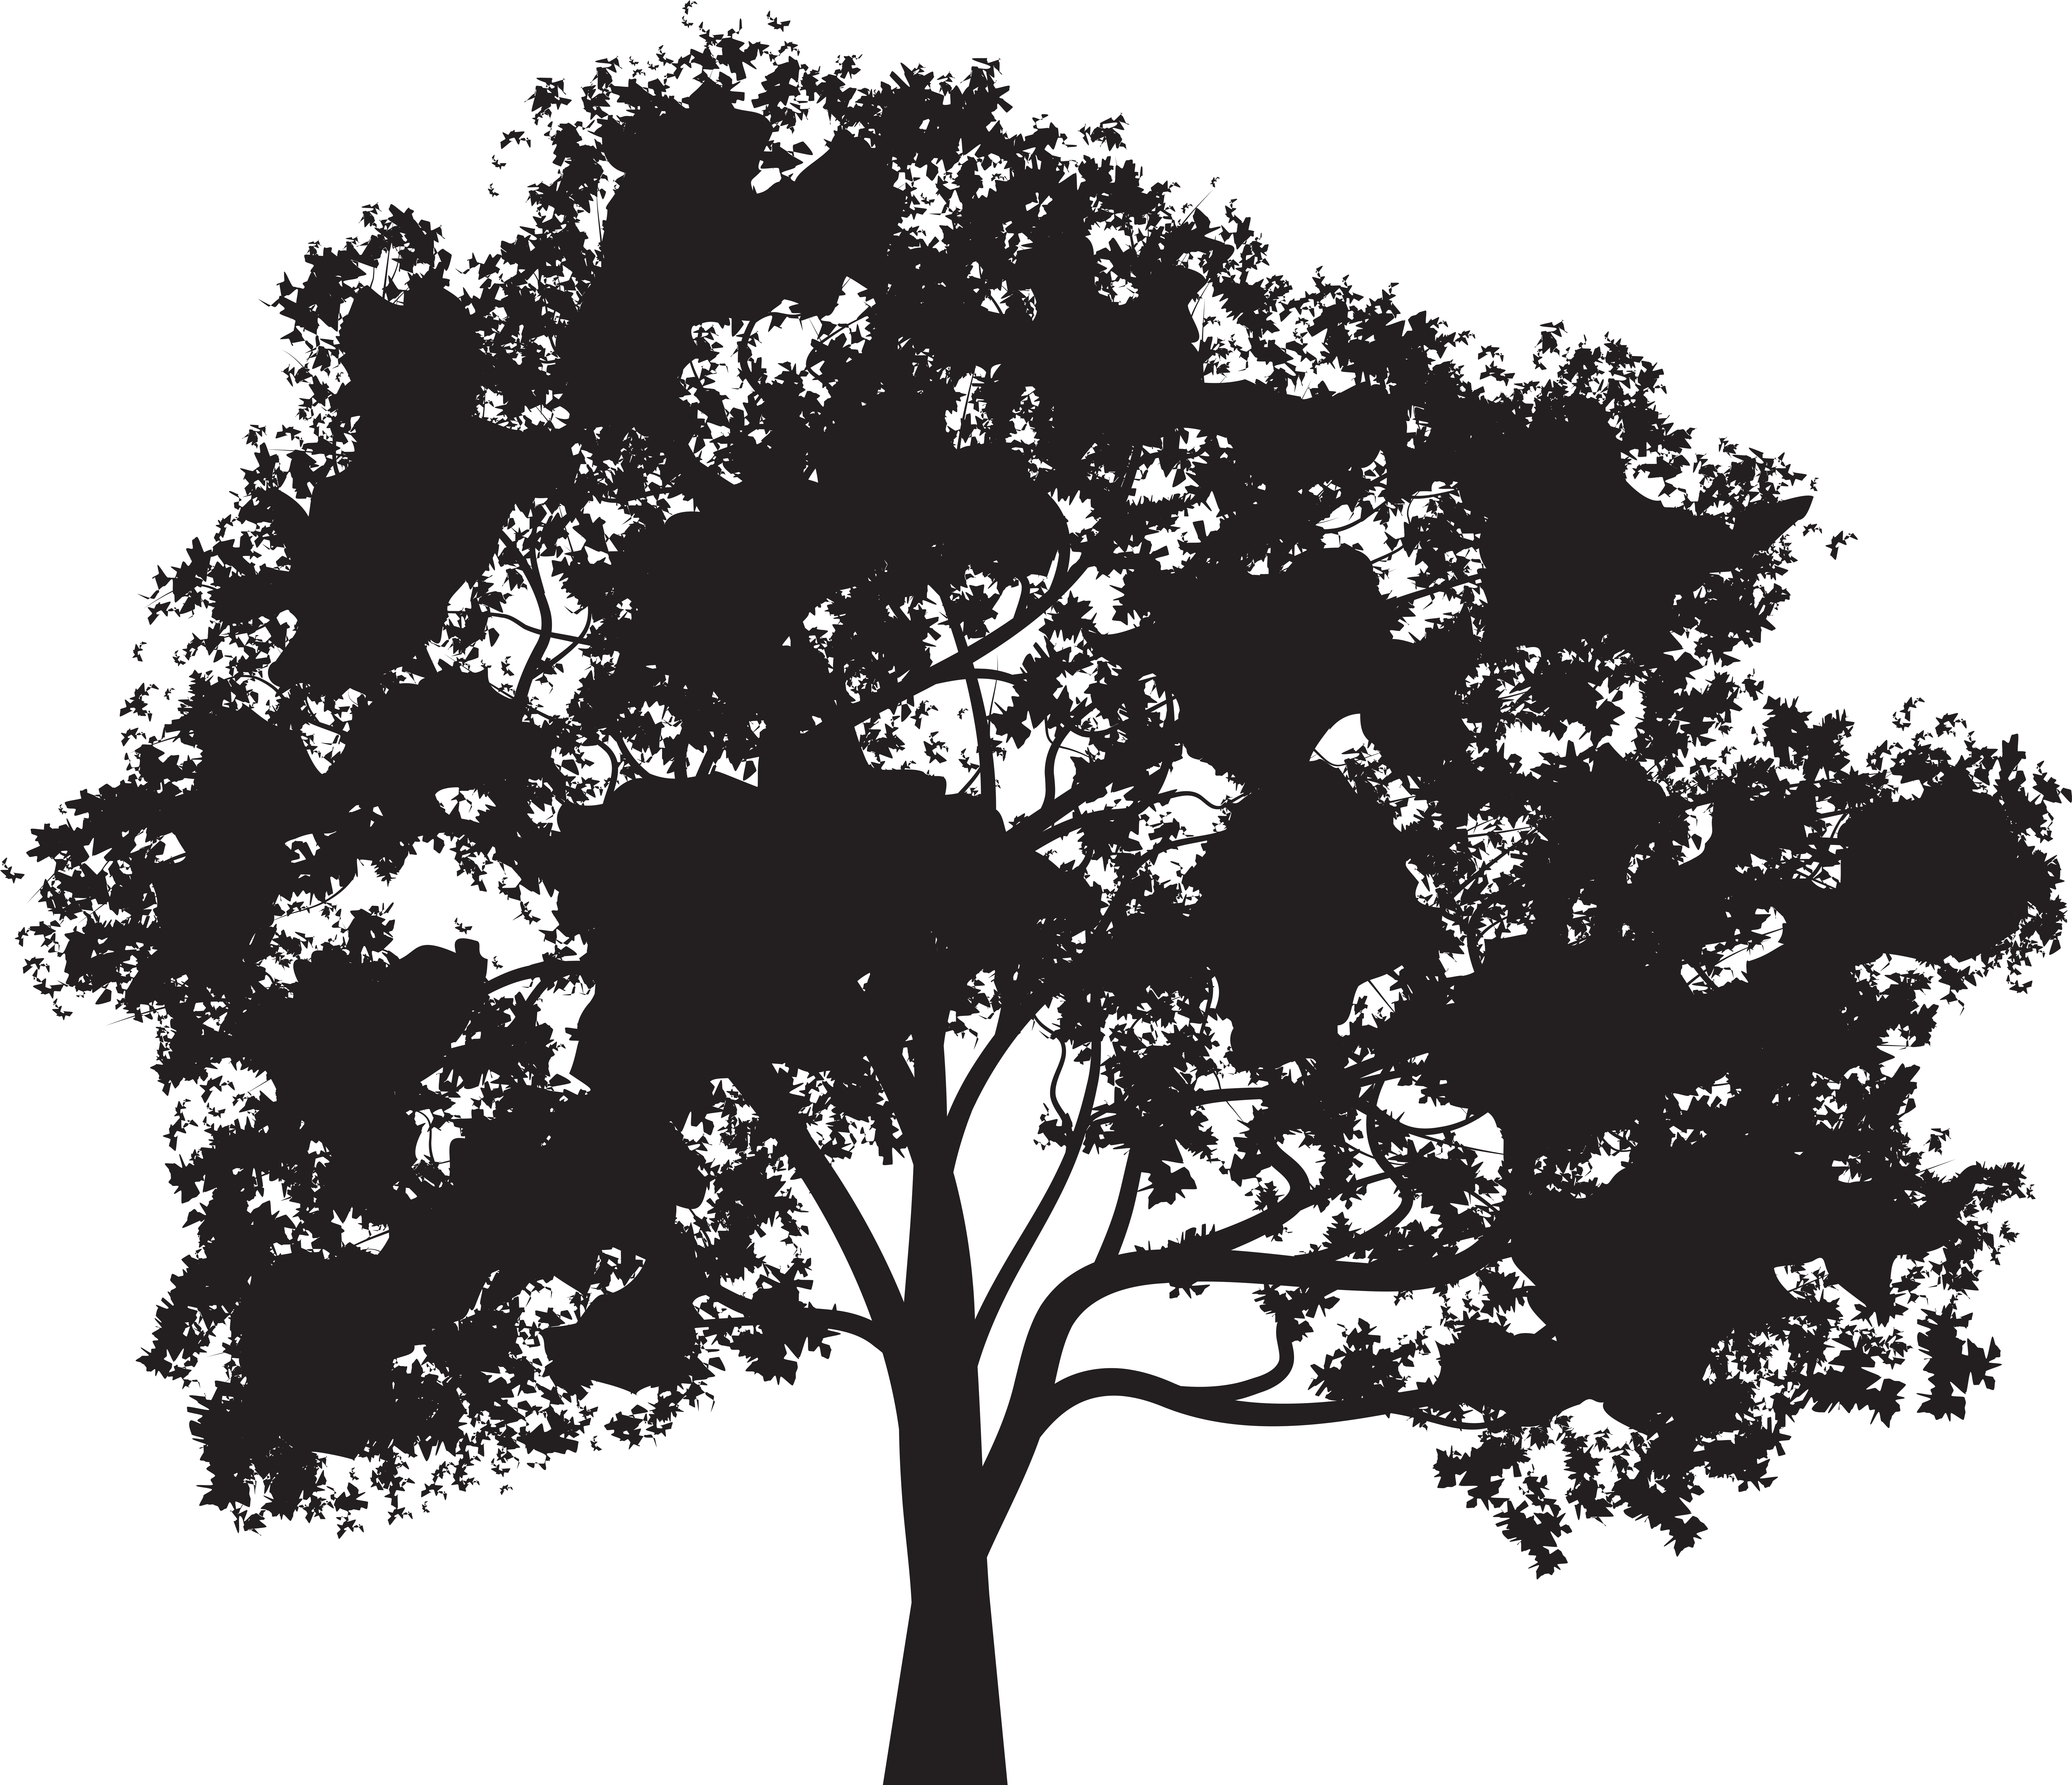 Tree Silhouette Png Clip Art Image - Tree Silhouette Png Clip Art Image (8000x6936)